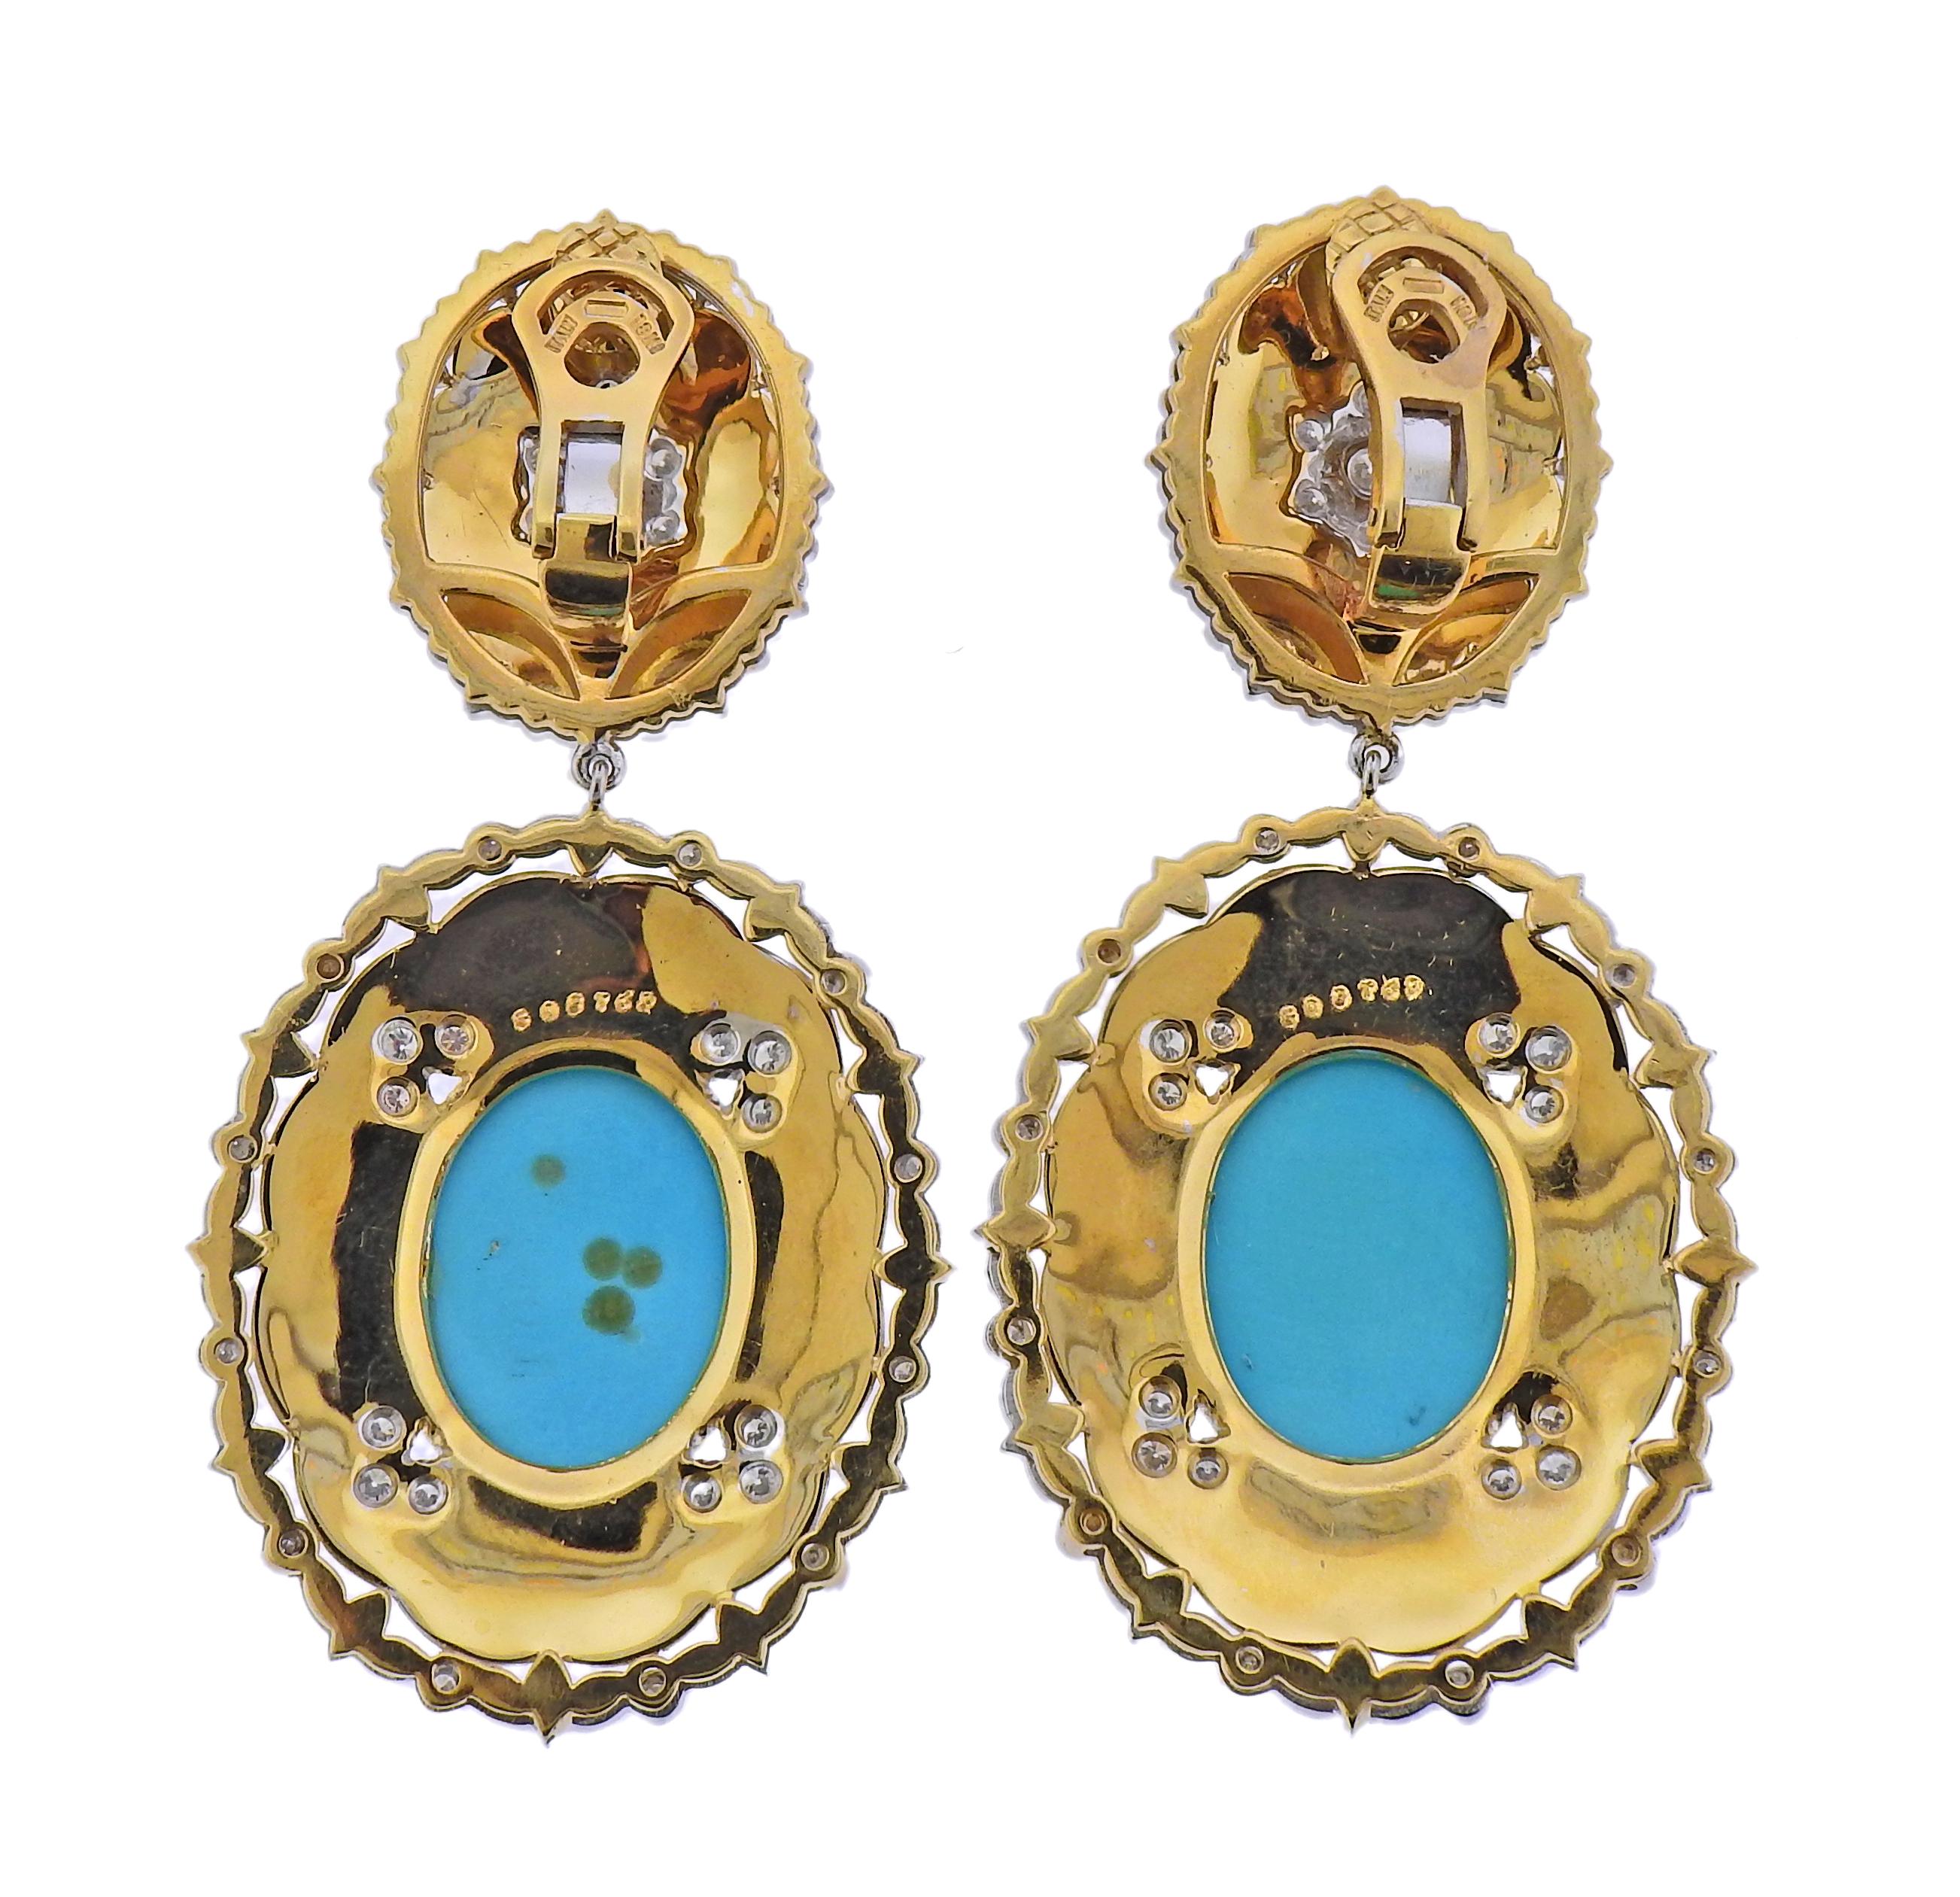 Impressive 18k yellow and white gold drop earrings, made in Italy, set with approx. 2.60ctw in GH/VS-SI diamonds and 20mm x 15mm Persian turquoise.  Earrings are 2.75